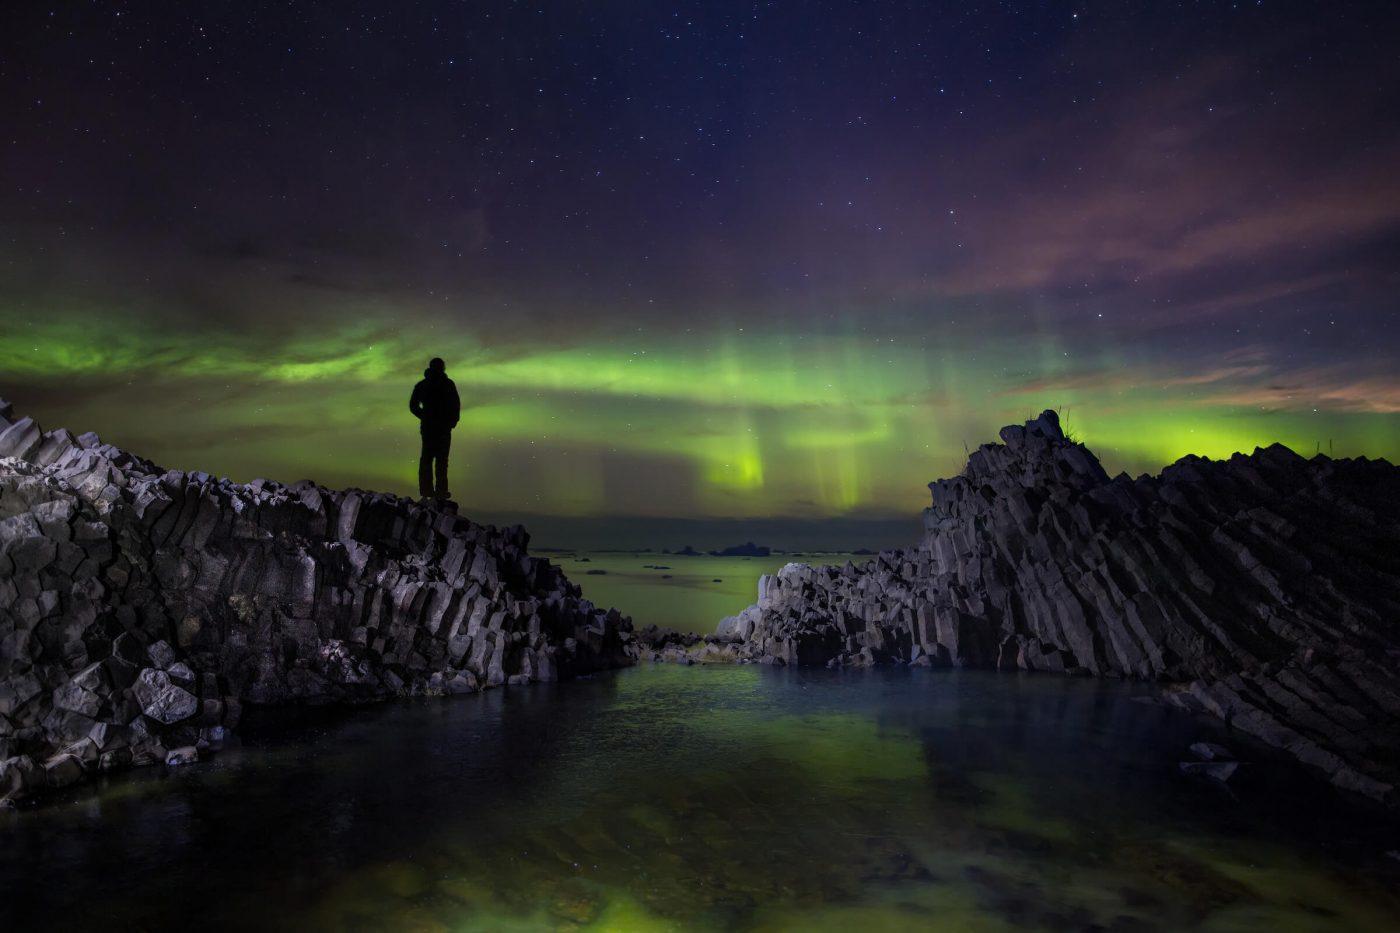 Hiker standing on volcanic rooks on Disko Island in North Greenland looking at northern lights dancing over the ocean. Photo by Paul Zizka